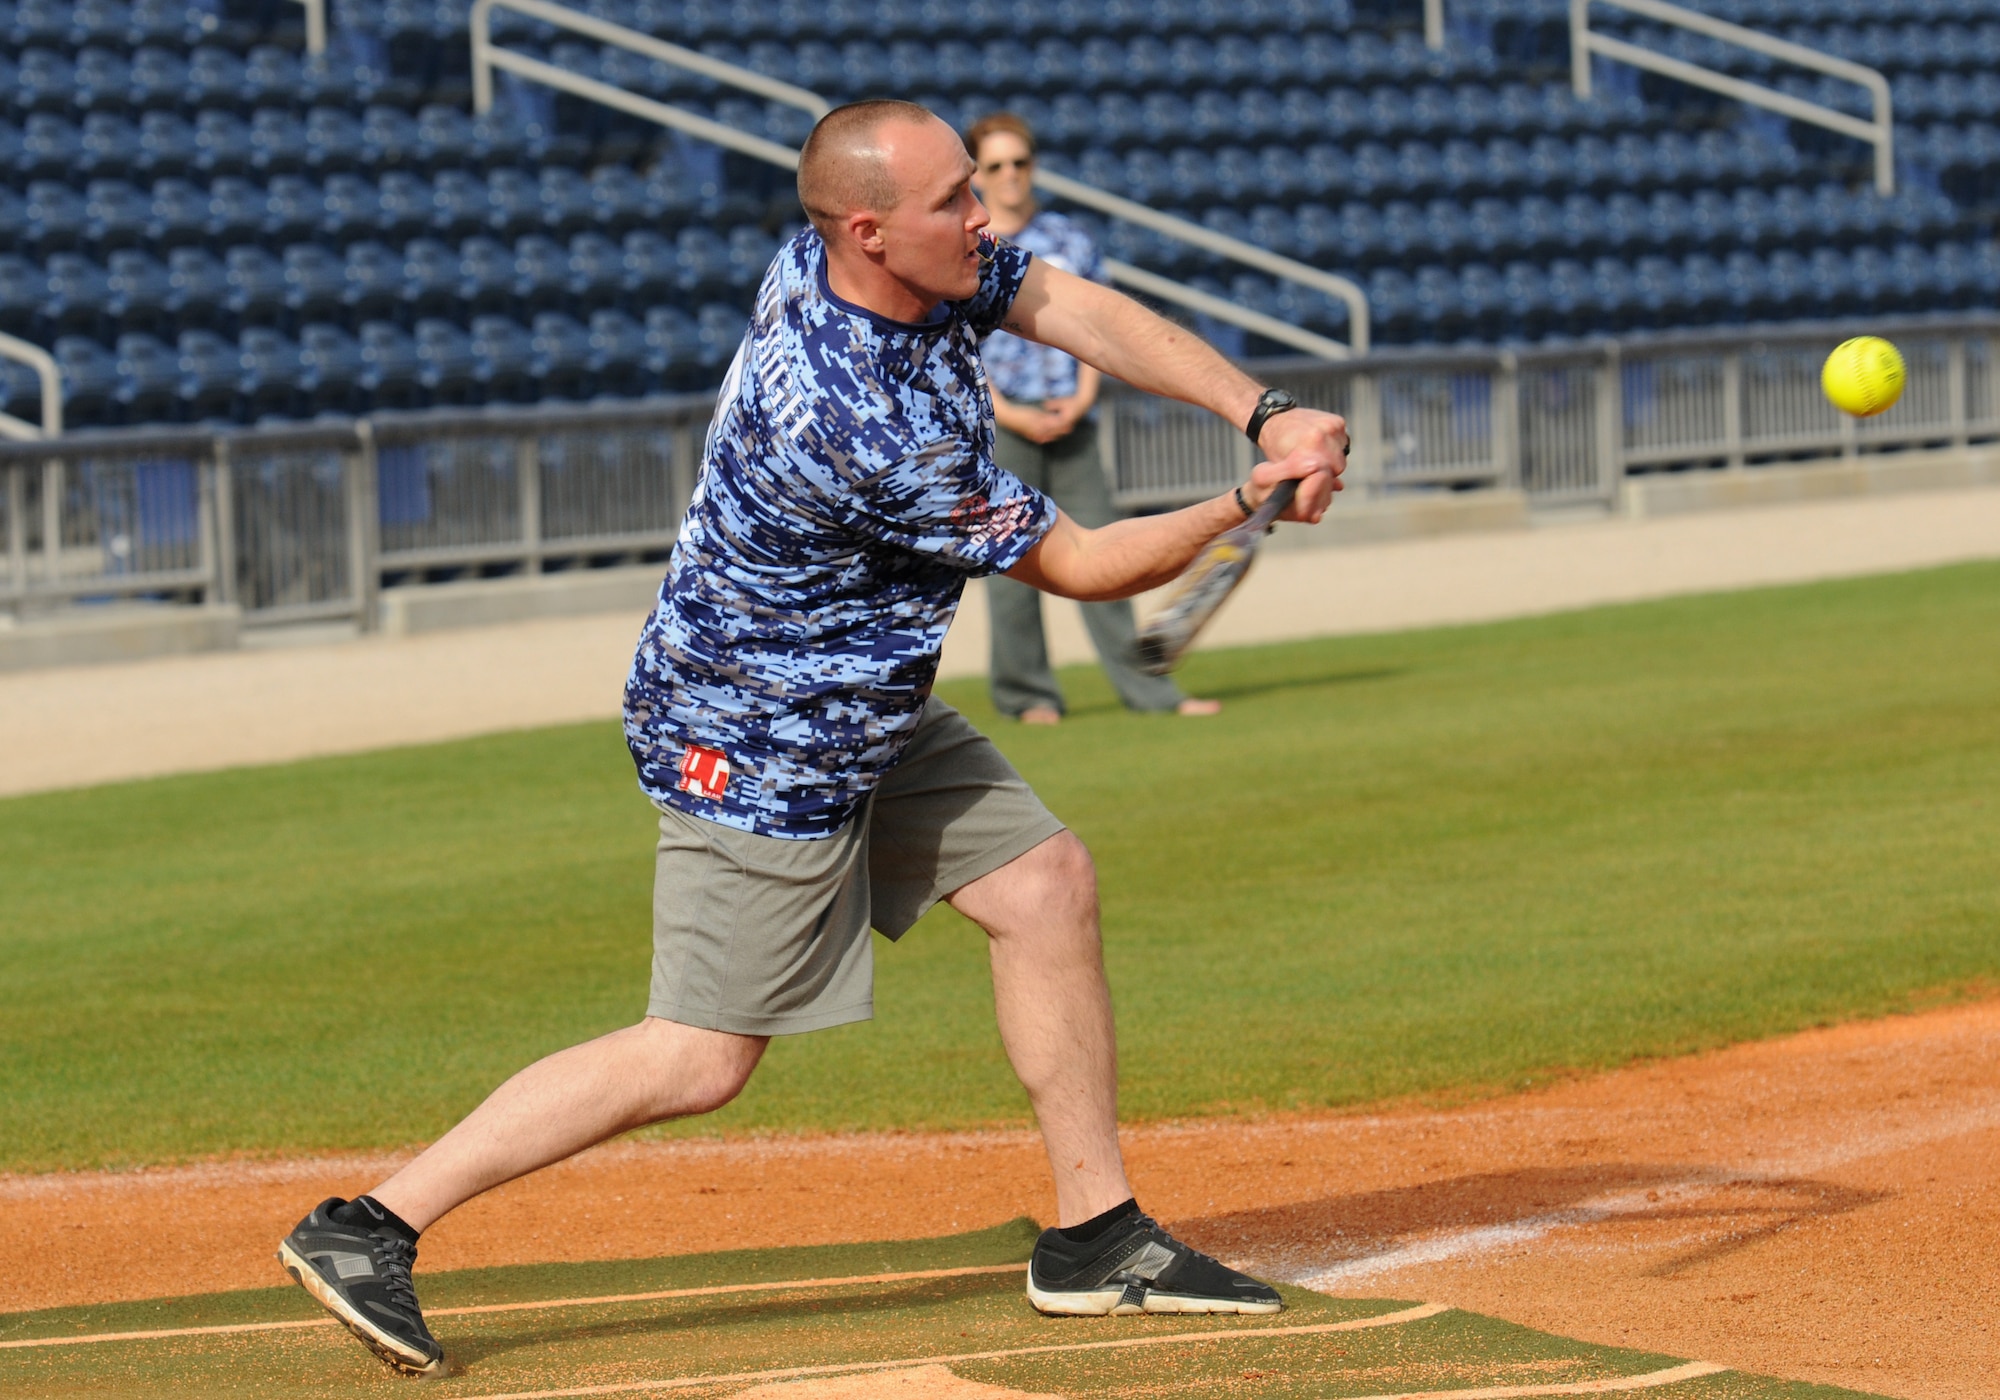 Capt. Harlan Glinski, 81st Security Forces operations officer and “Boots” team member, takes a swing during the “Boots versus Badges” softball game at the Biloxi Shuckers MGM Park April 21, 2016, Biloxi, Miss. The game was the kickoff event for the 2016 Special Olympics Mississippi Summer Games, which will be hosted by Keesler Air Force Base, Miss., May 20-21. (U.S. Air Force photo by Kemberly Groue)